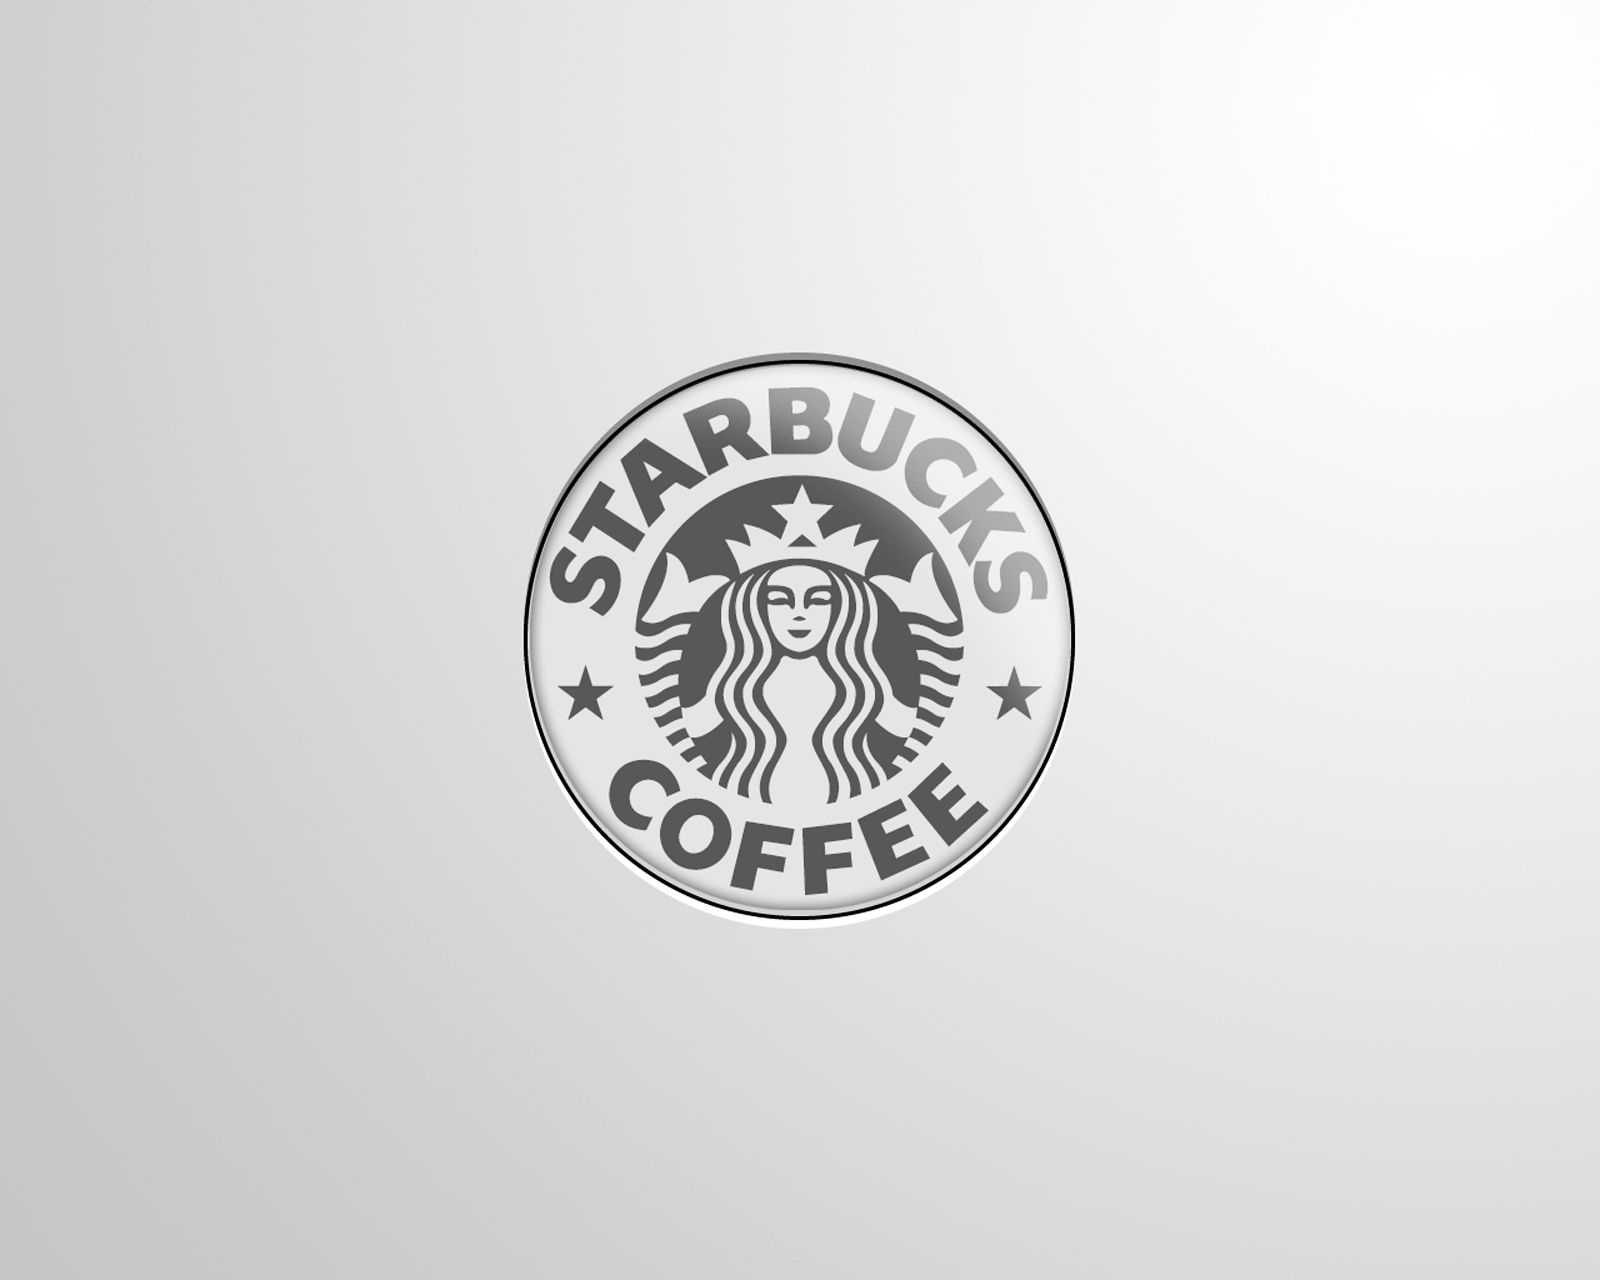 Starbucks Backgrounds For Powerpoint Templates – Ppt Backgrounds With Starbucks Powerpoint Template